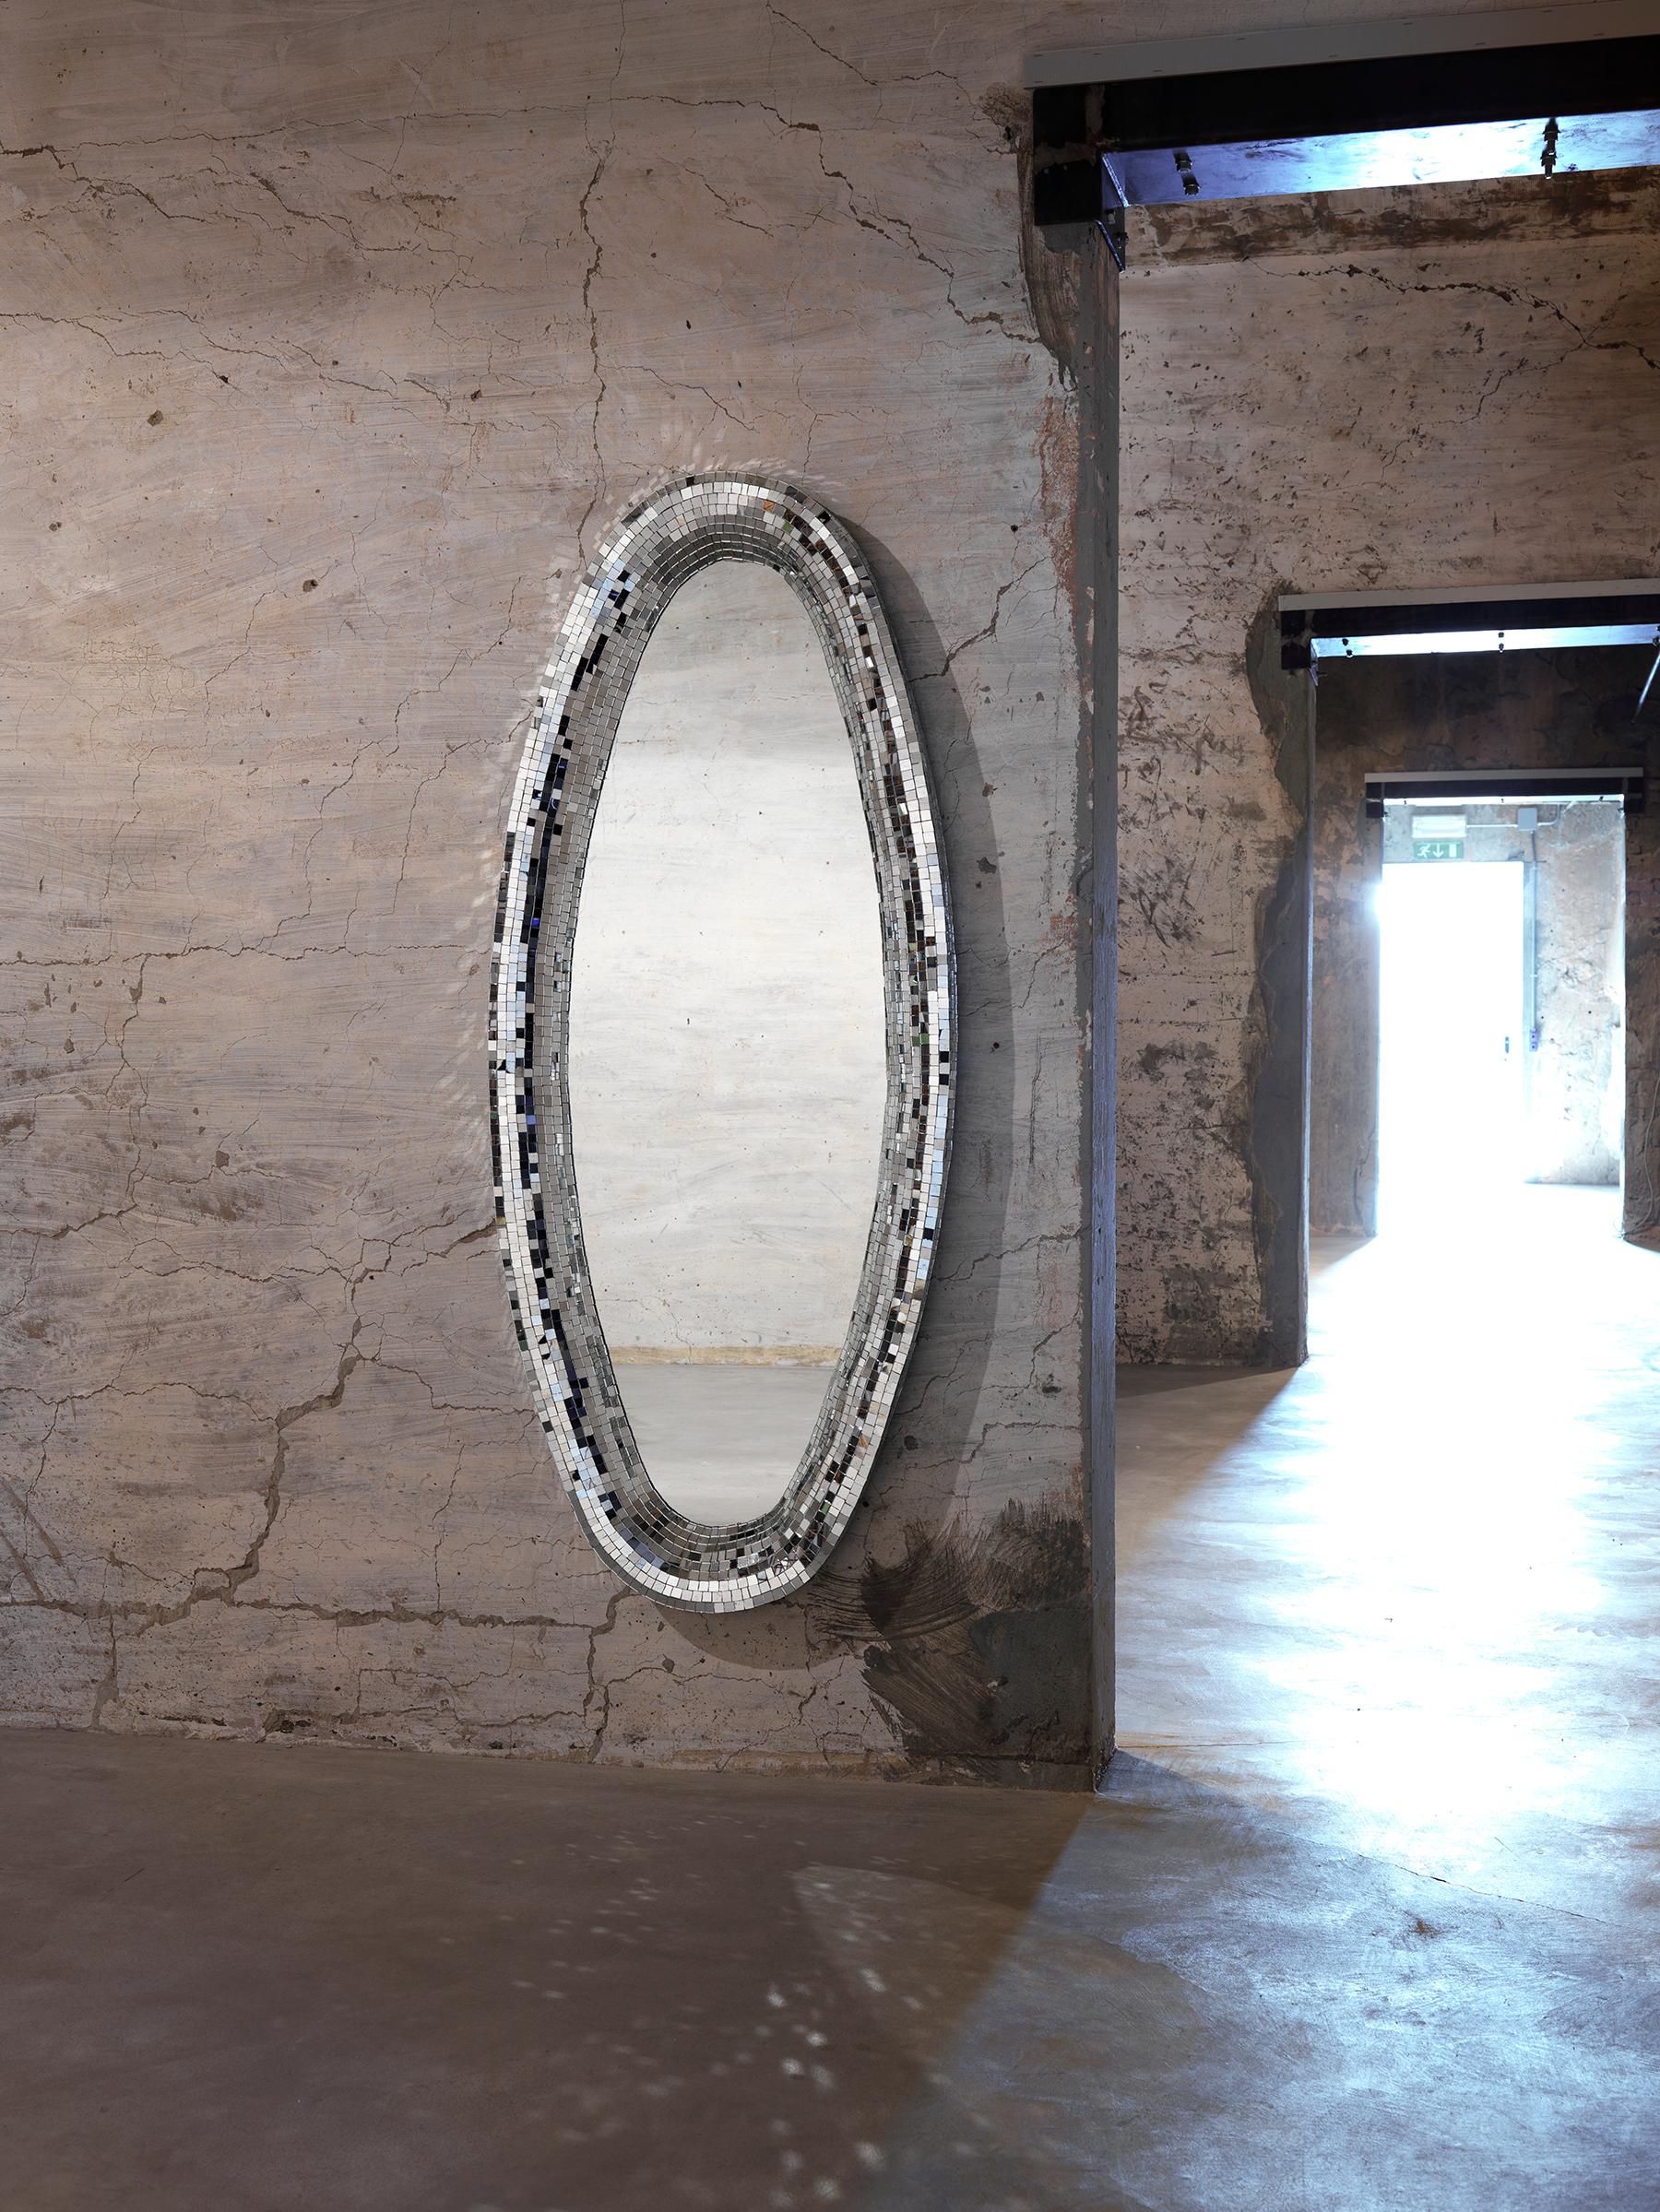 Gold Atollo mirror by Davide Medri
Materials: mirror, glass mosaic (gold)
Also available in silver.
Dimensions: H 170 x D 70 cm

Davide Medri was born in Cesena on August 7th 1967 and graduated at the Academy of Fine Arts in Ravenna, the Gino